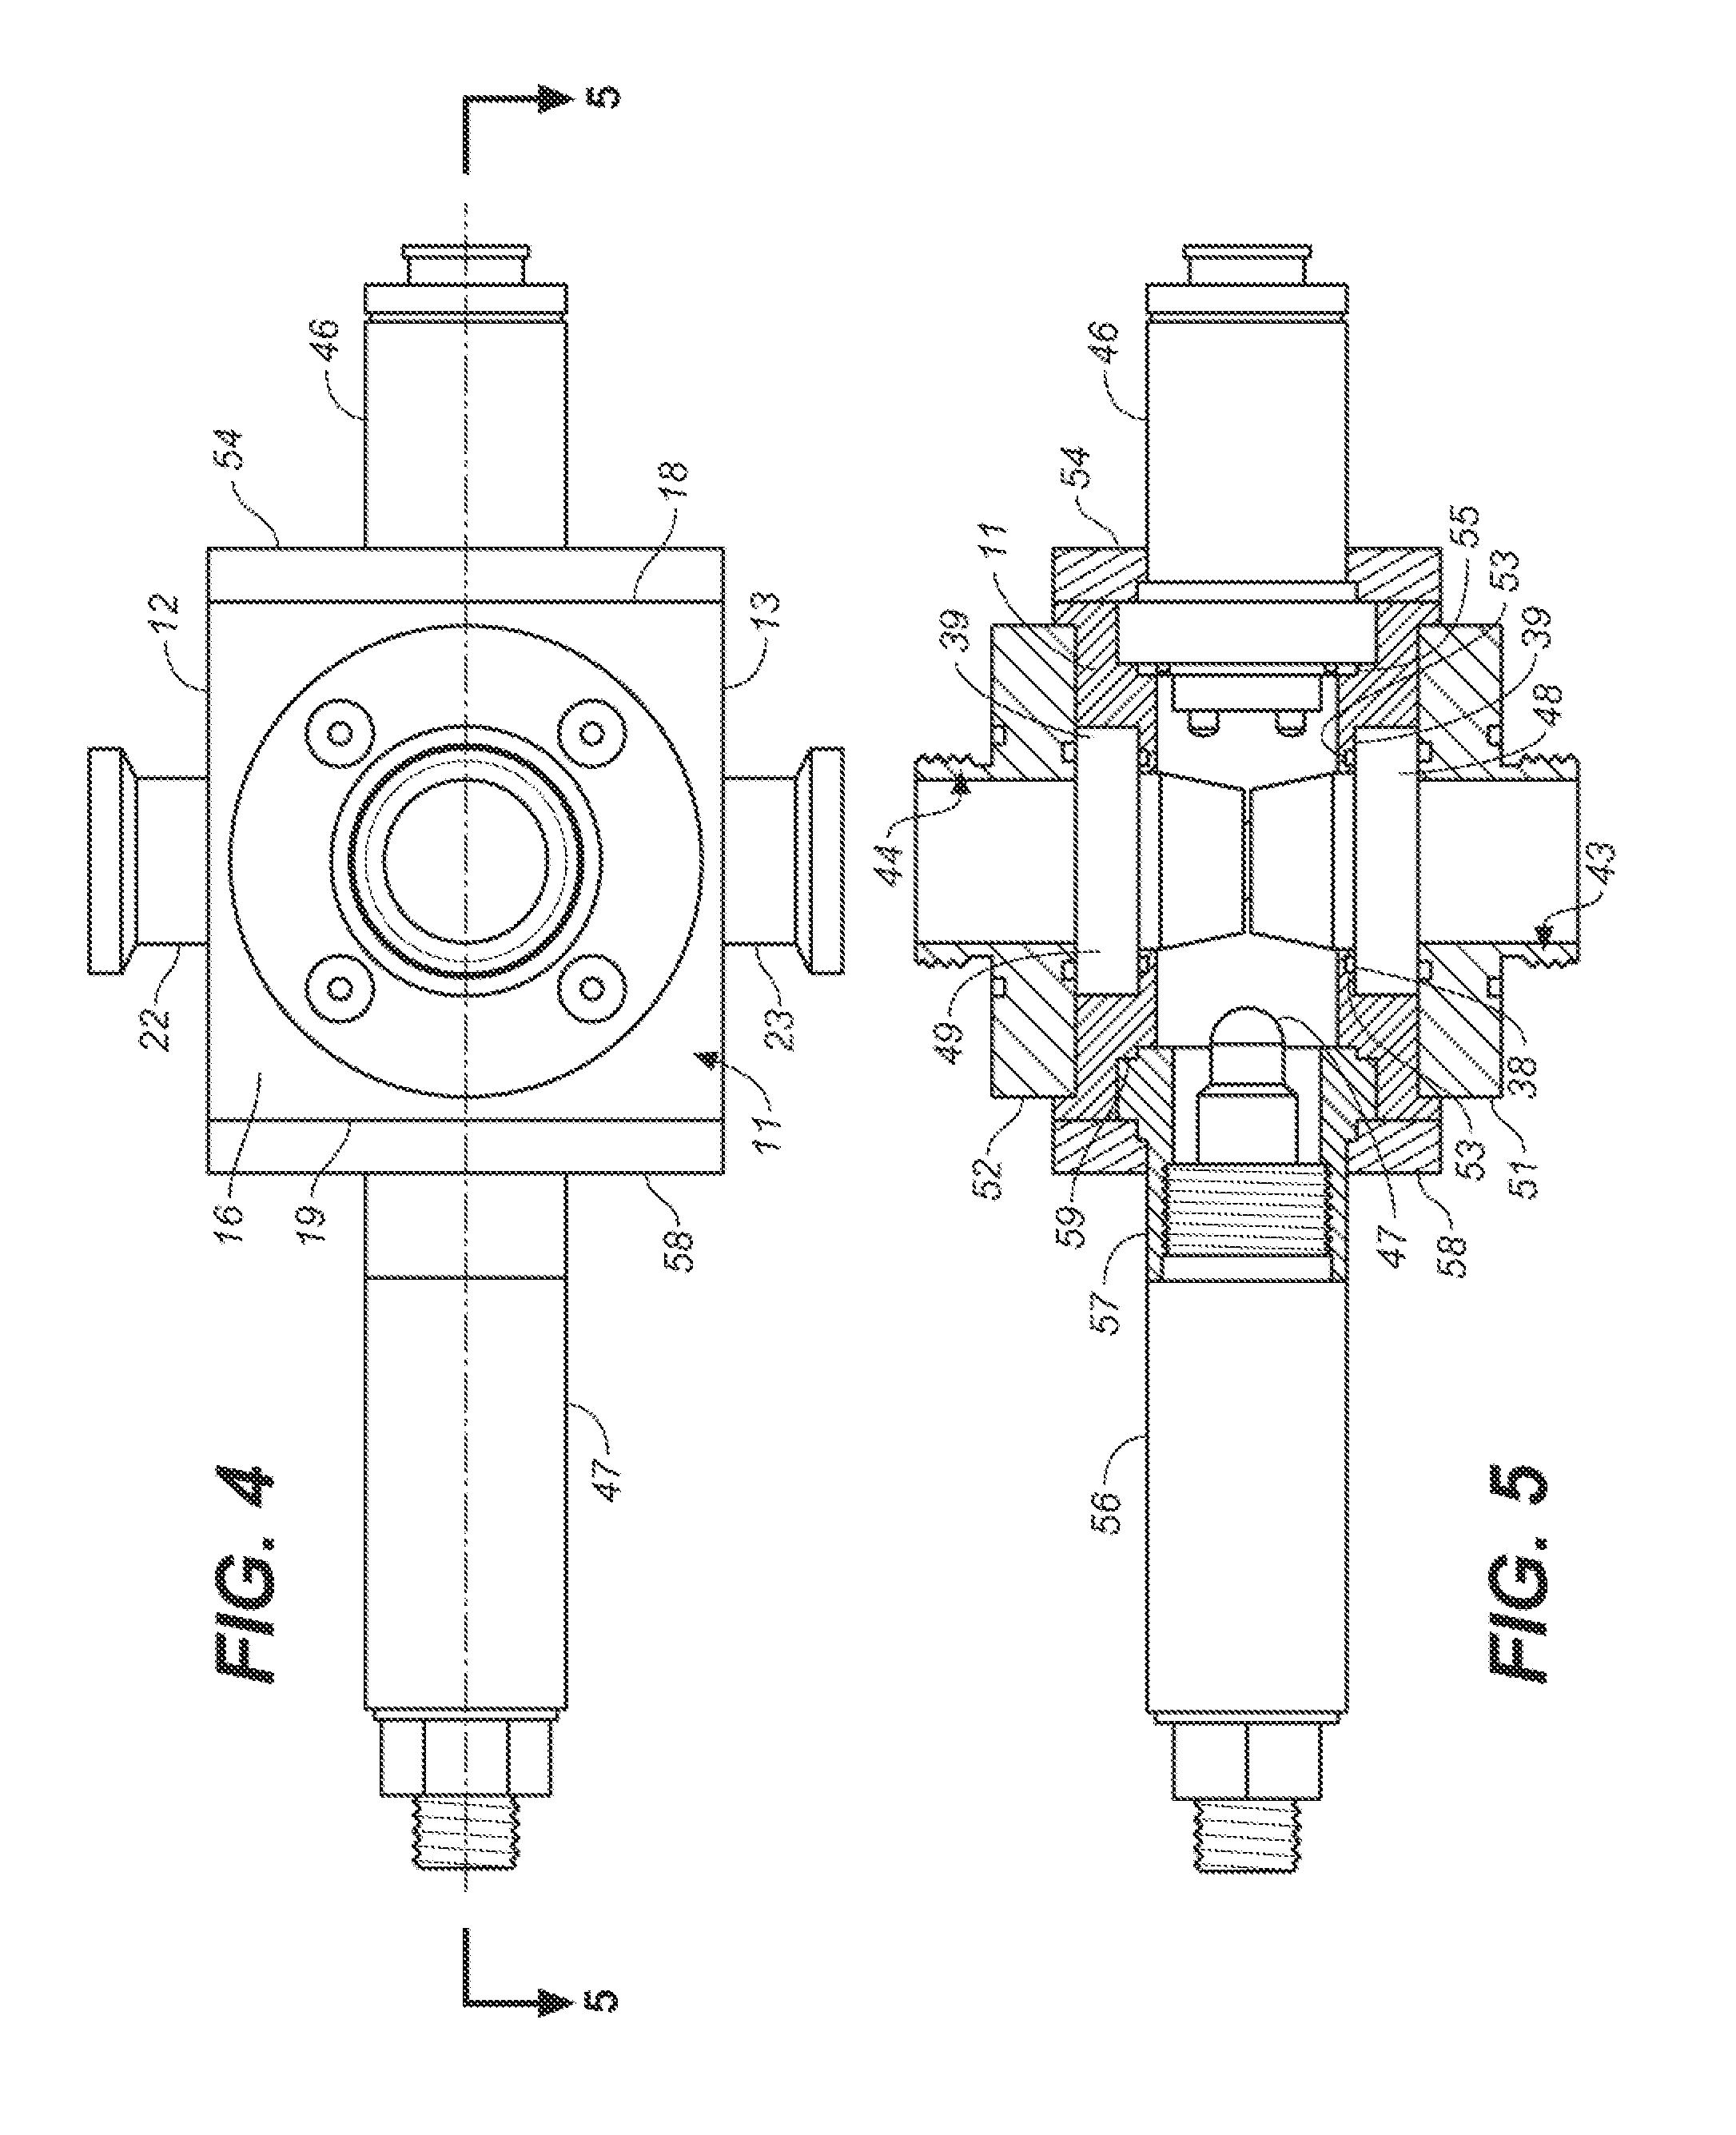 Multi-port inline flow cell for use in monitoring multiple parameters in a sanitary process line